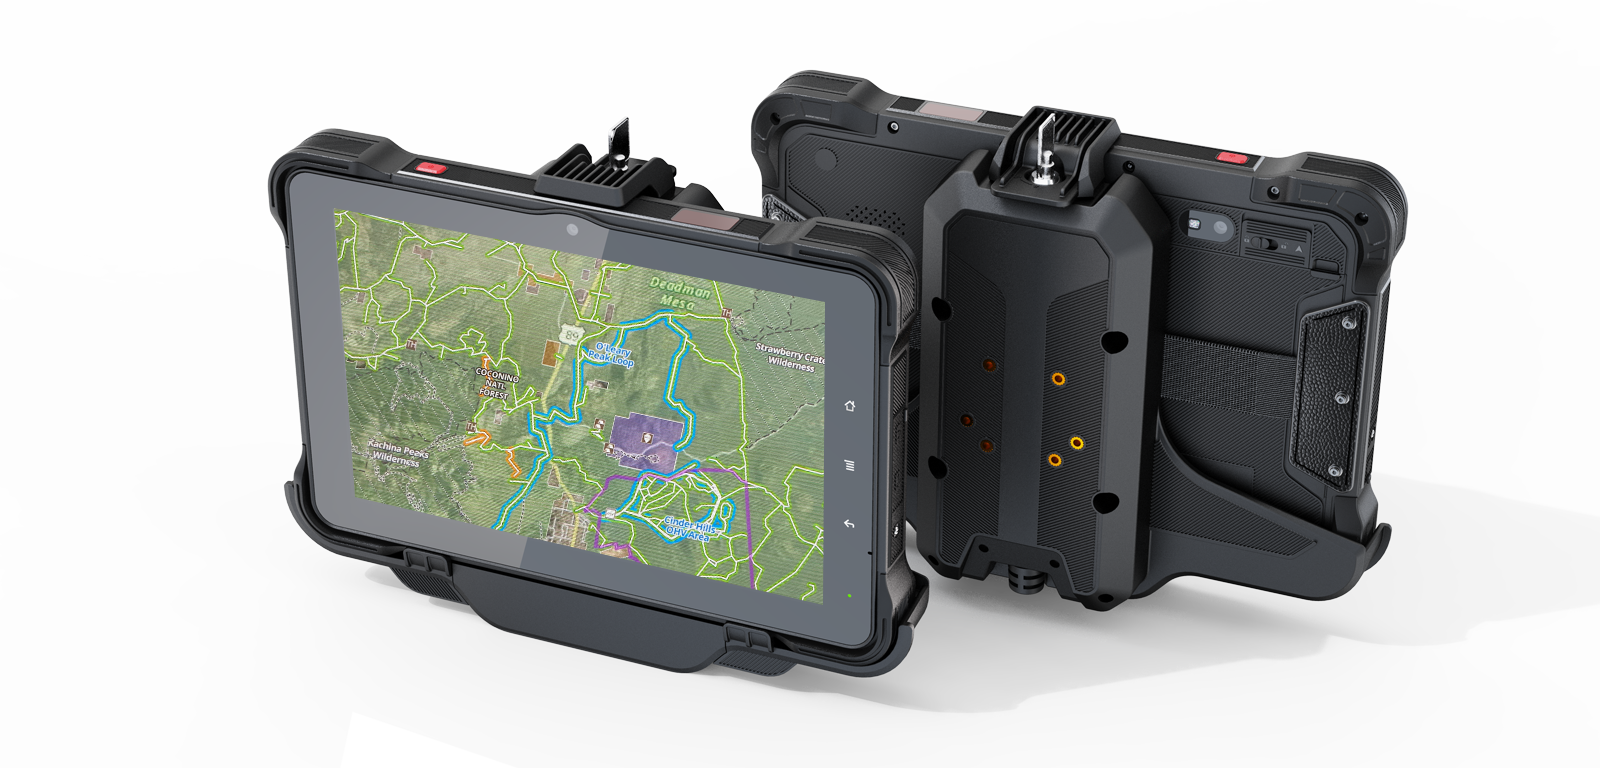 Brillar Muestra su Sasquatch 10” Android Rugged Off-Road Vehicle GPS Tablet with Docking